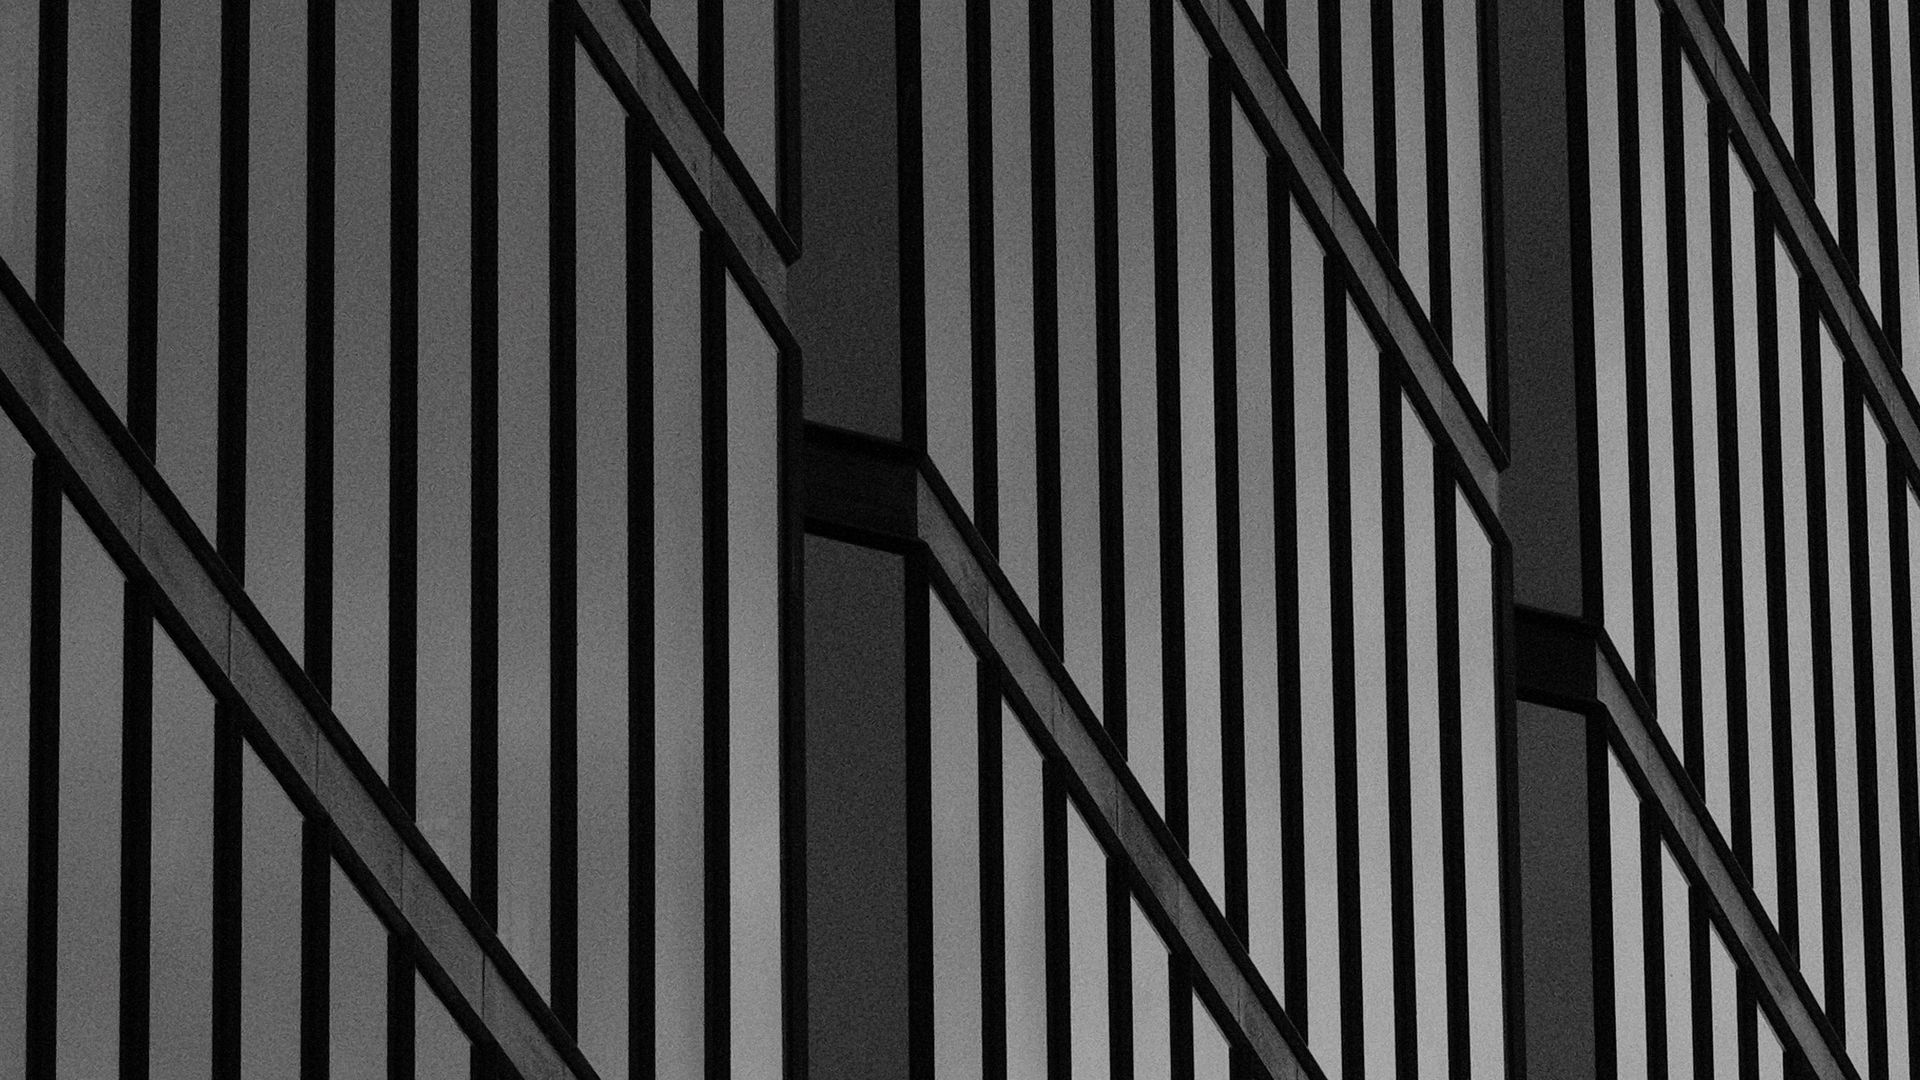 Download wallpaper 1920x1080 stripes, building, facade, black and white ...